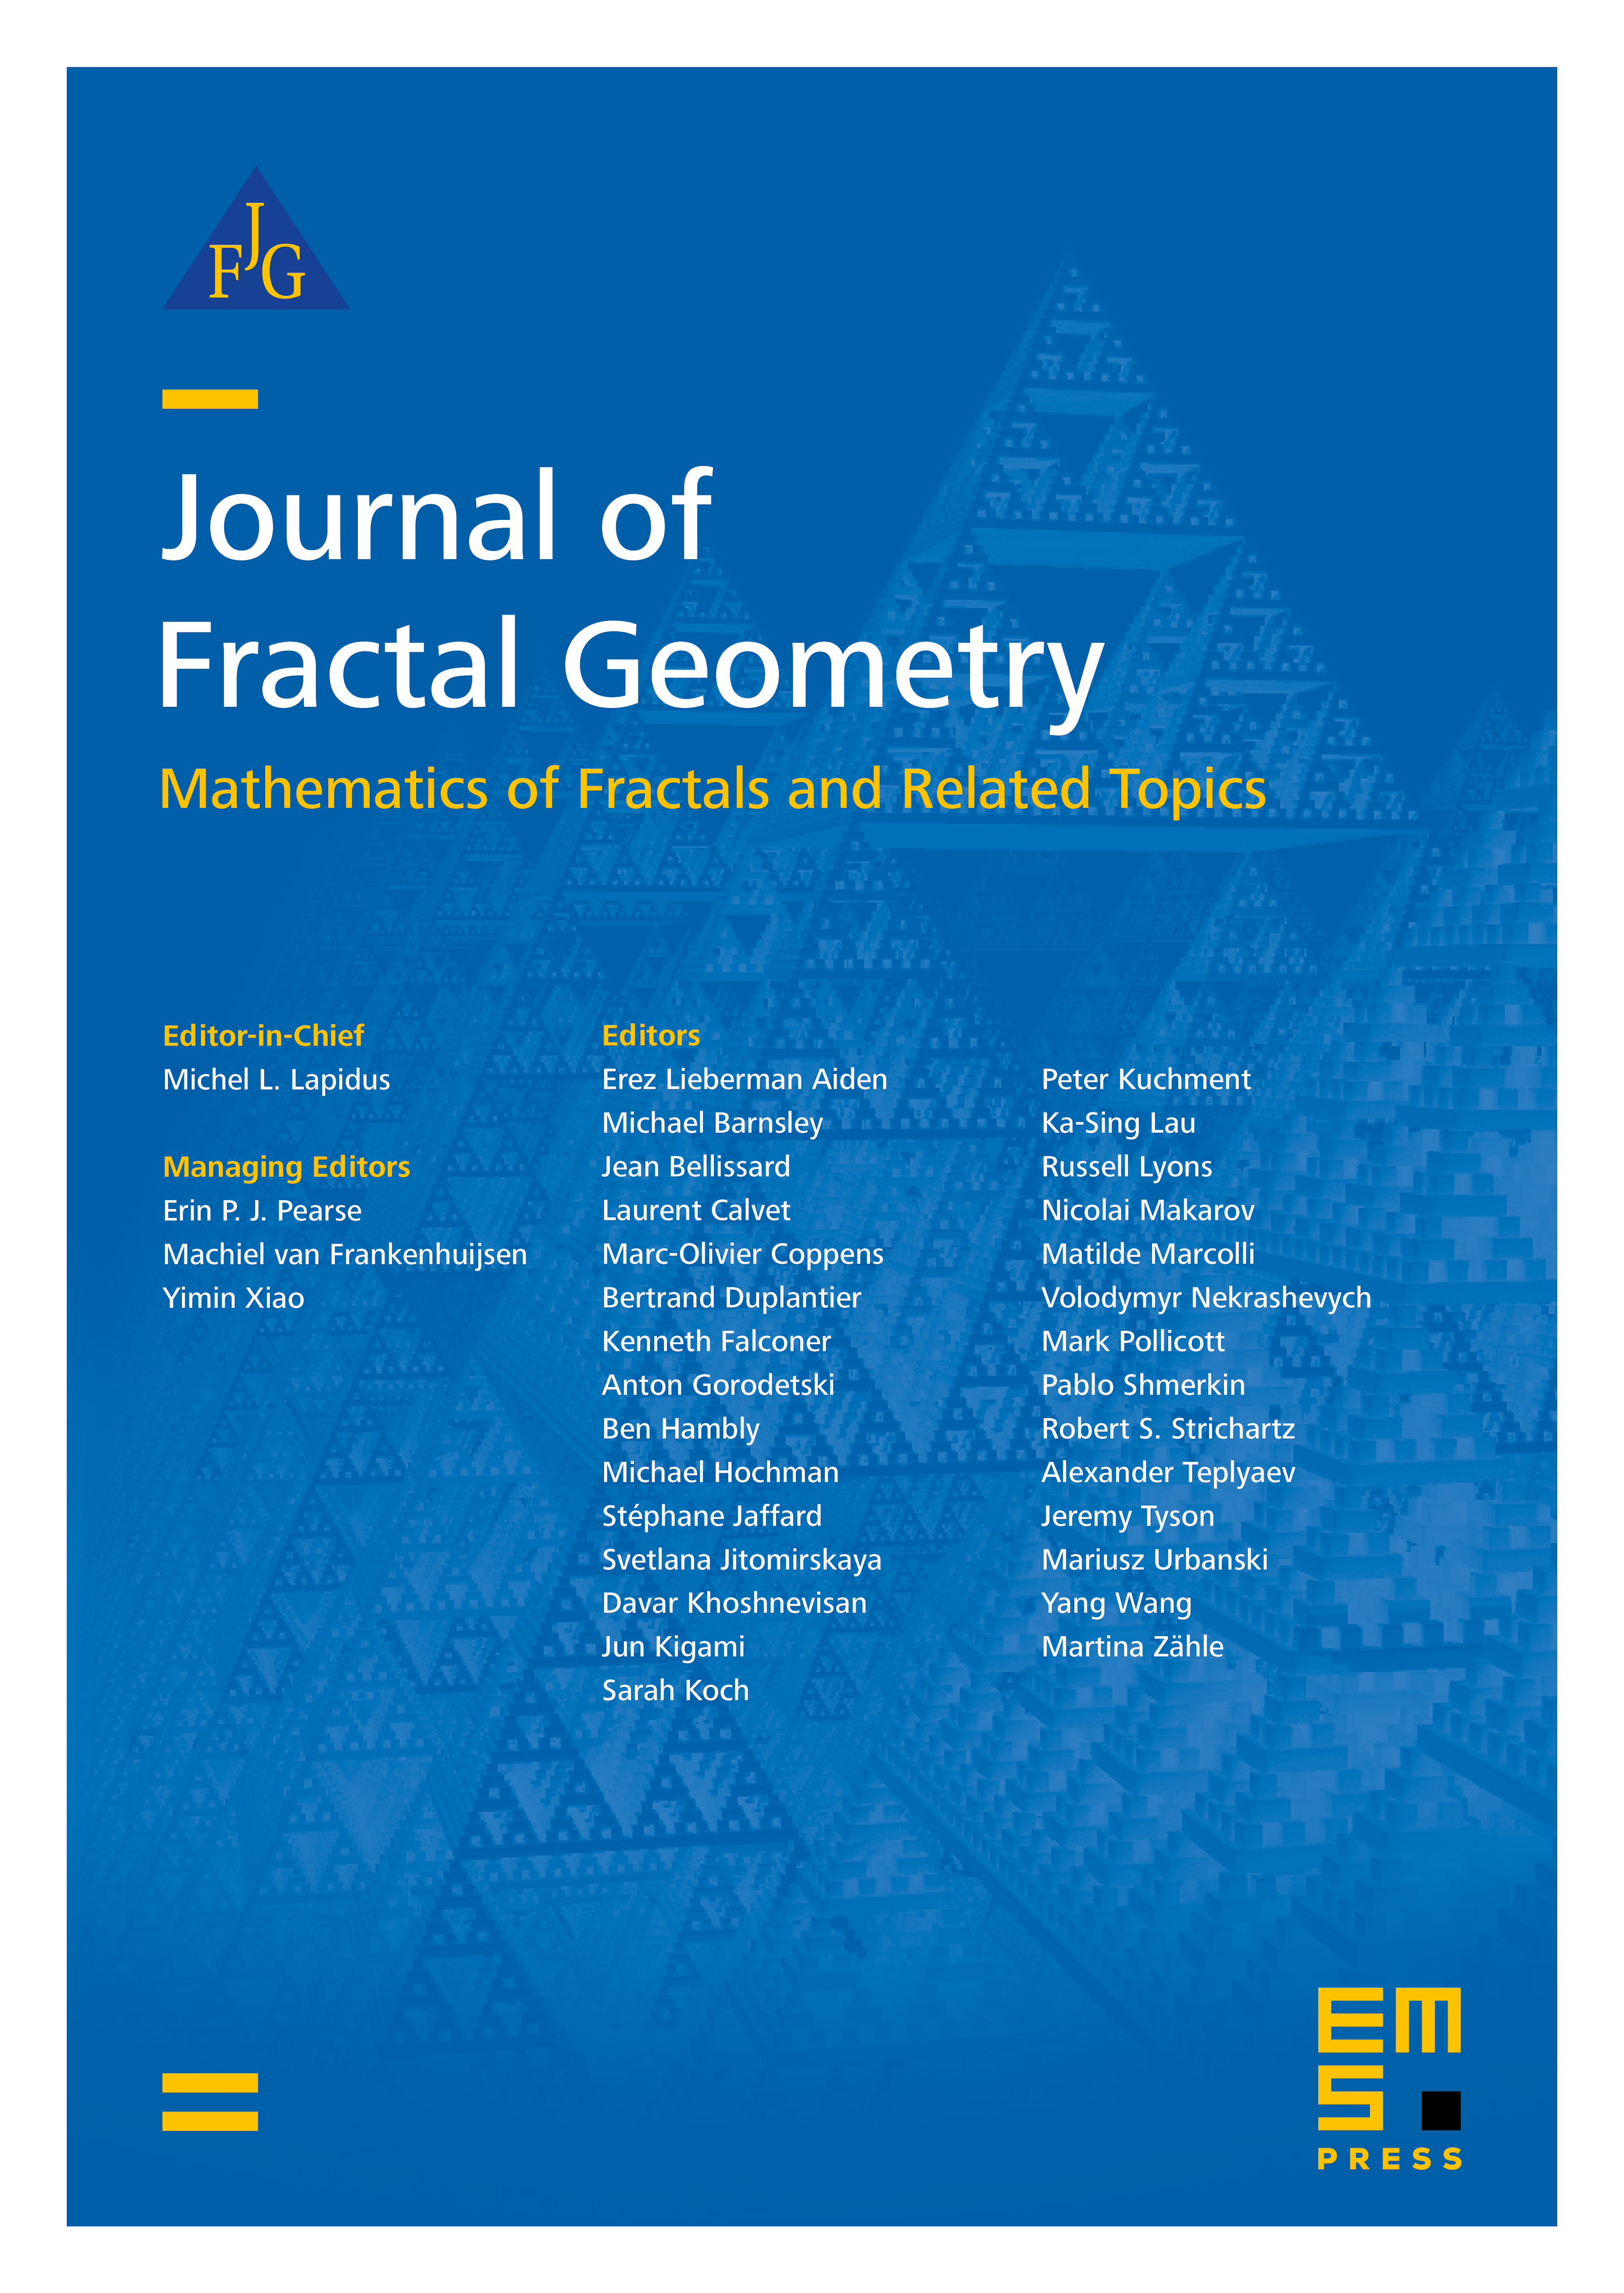 Box dimension of generalized affine fractal interpolation functions cover